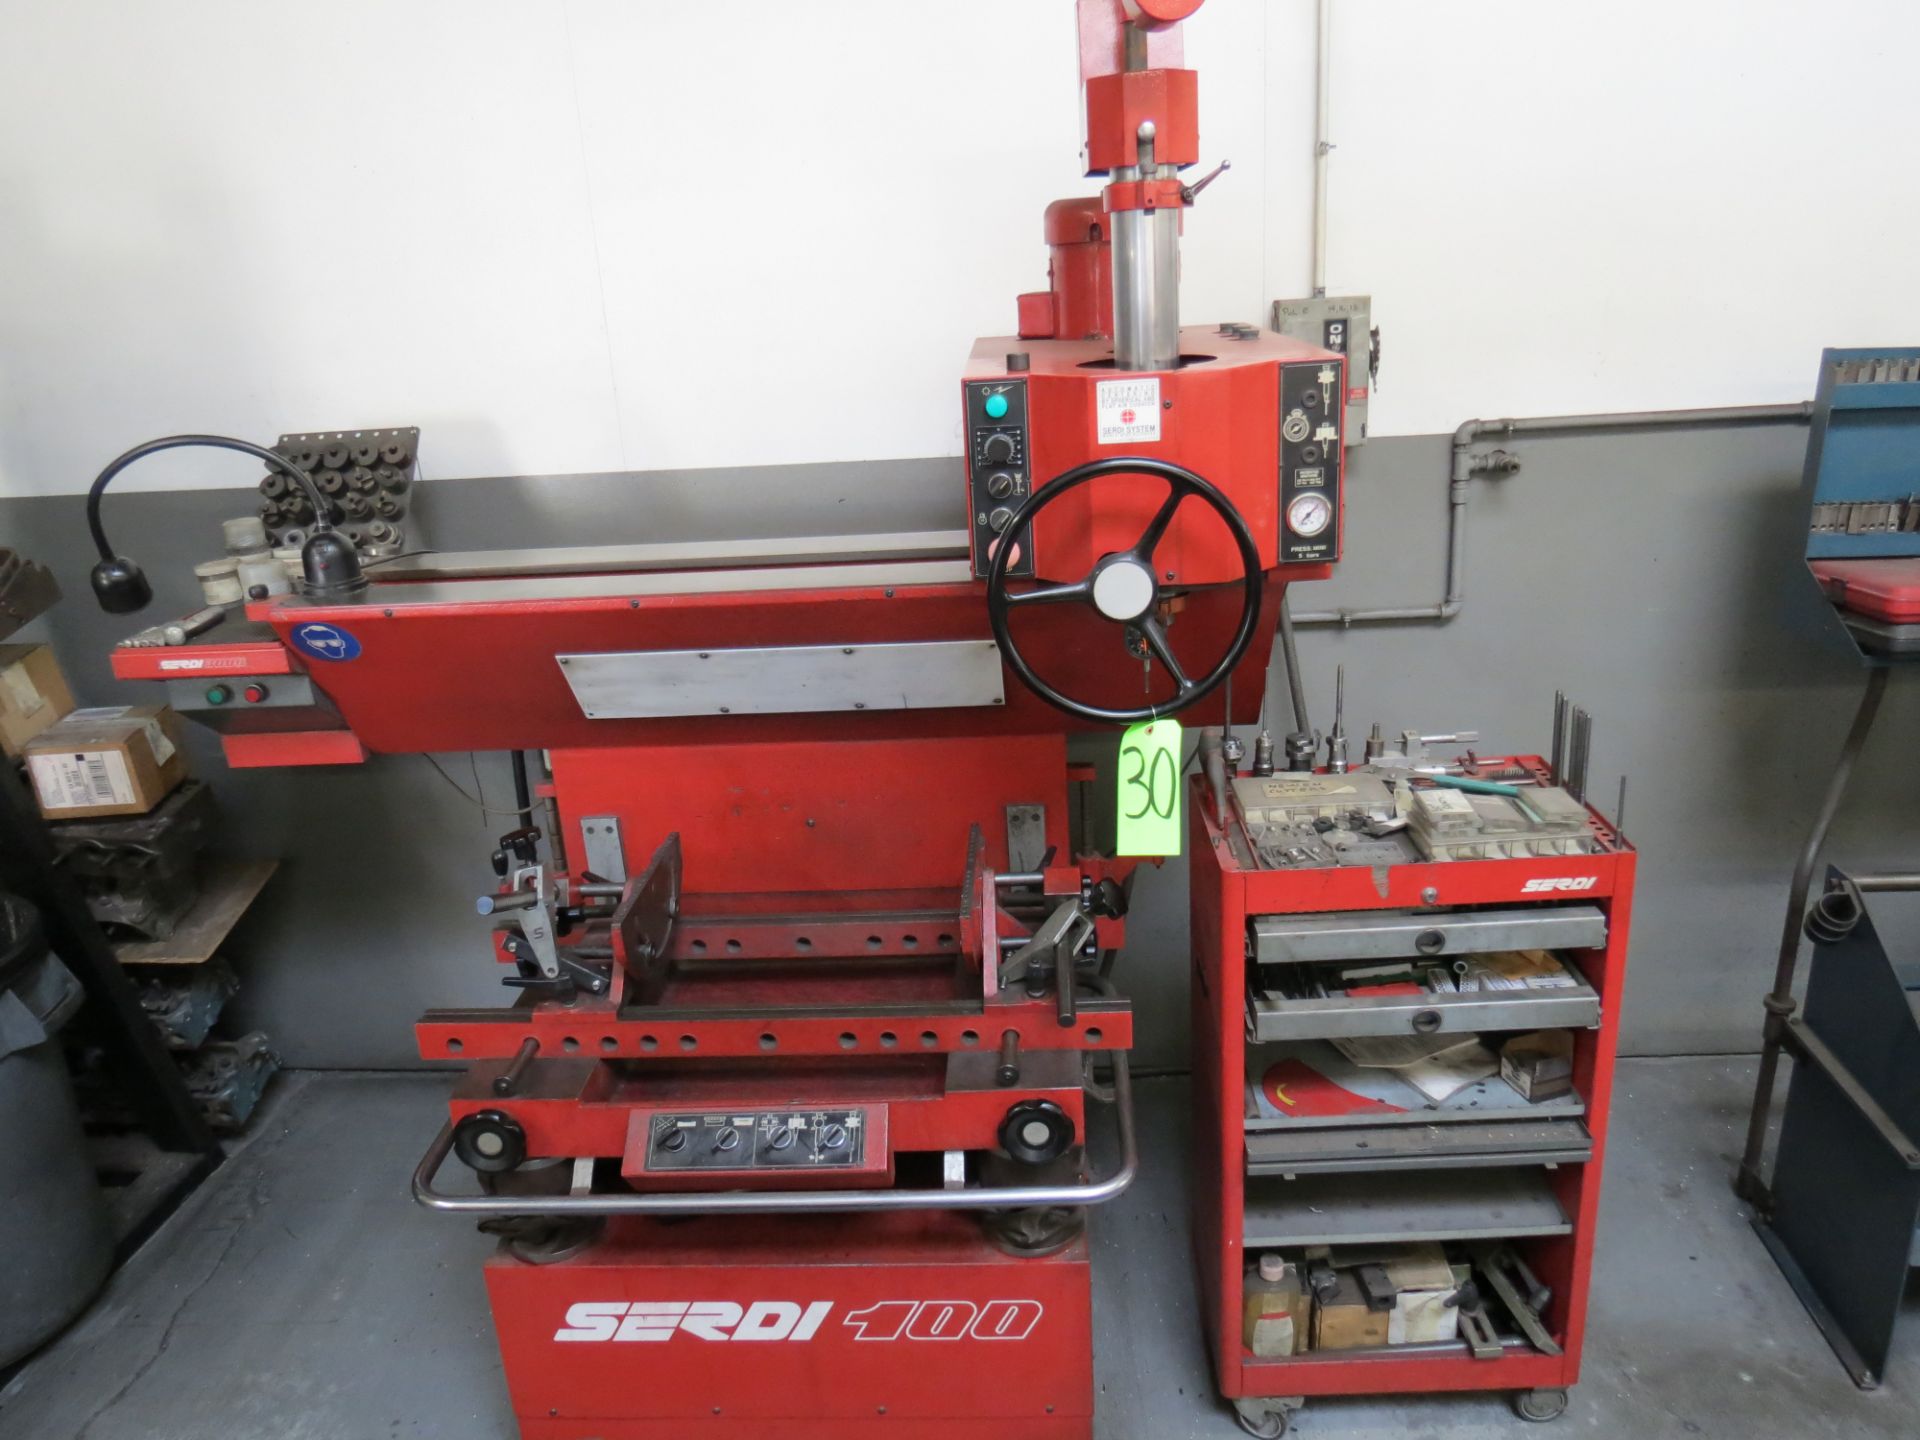 SERDI 100 VALVE SEAT CUTTING MACHINE WITH AND GUIDE AND SEAT TOOLING 1" TO 2 1/2" - Image 3 of 4